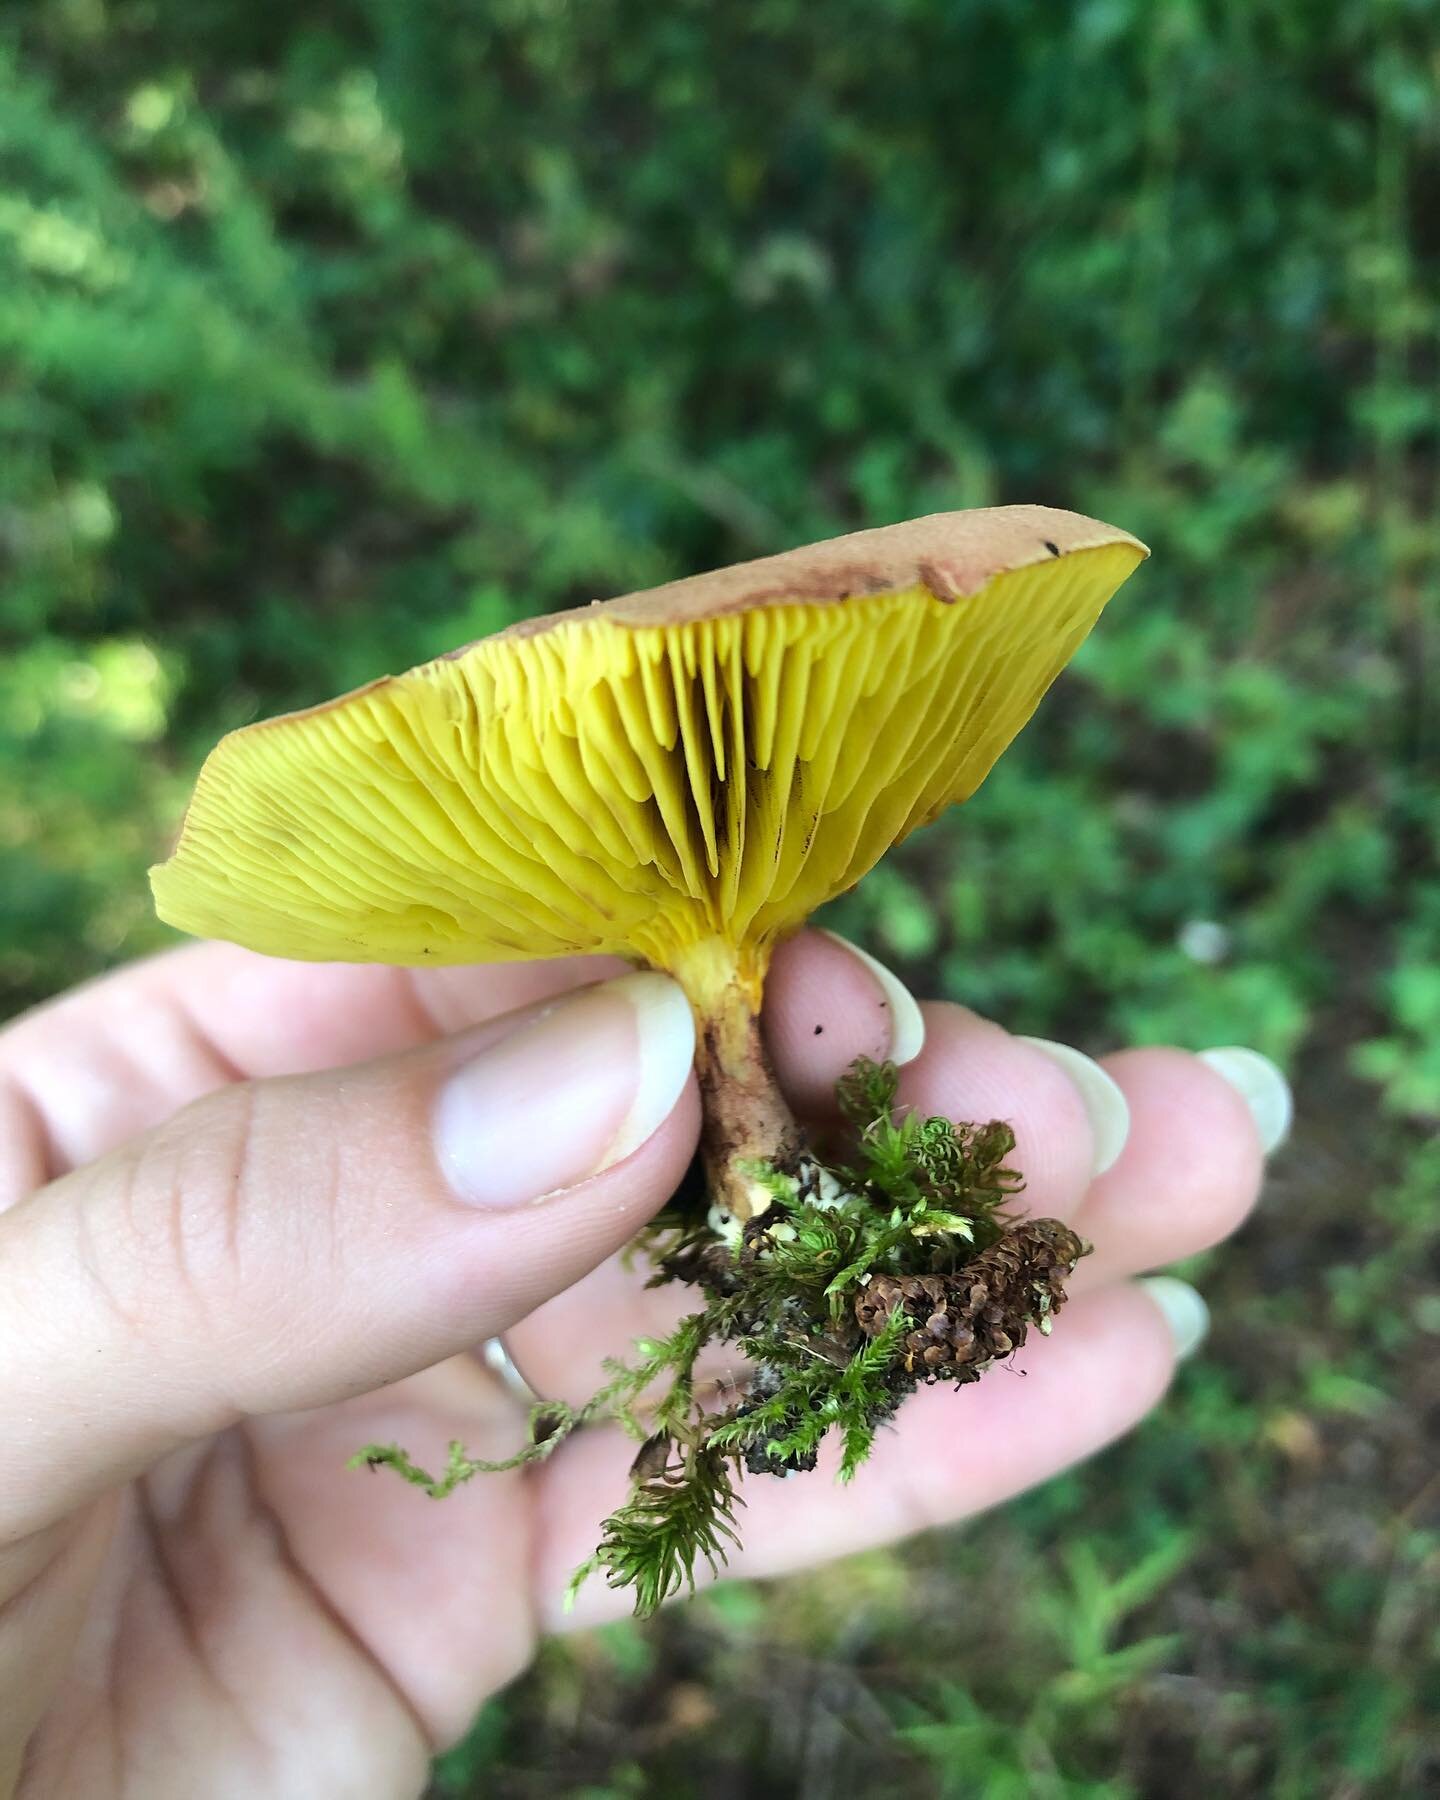 My first mushroom expedition around our property yielded 30 different species! I am blown away and can&rsquo;t wait to learn more about mycology! 🍄

#mushroom #fungi #mycology #foraging #garden #love #wonder #learning